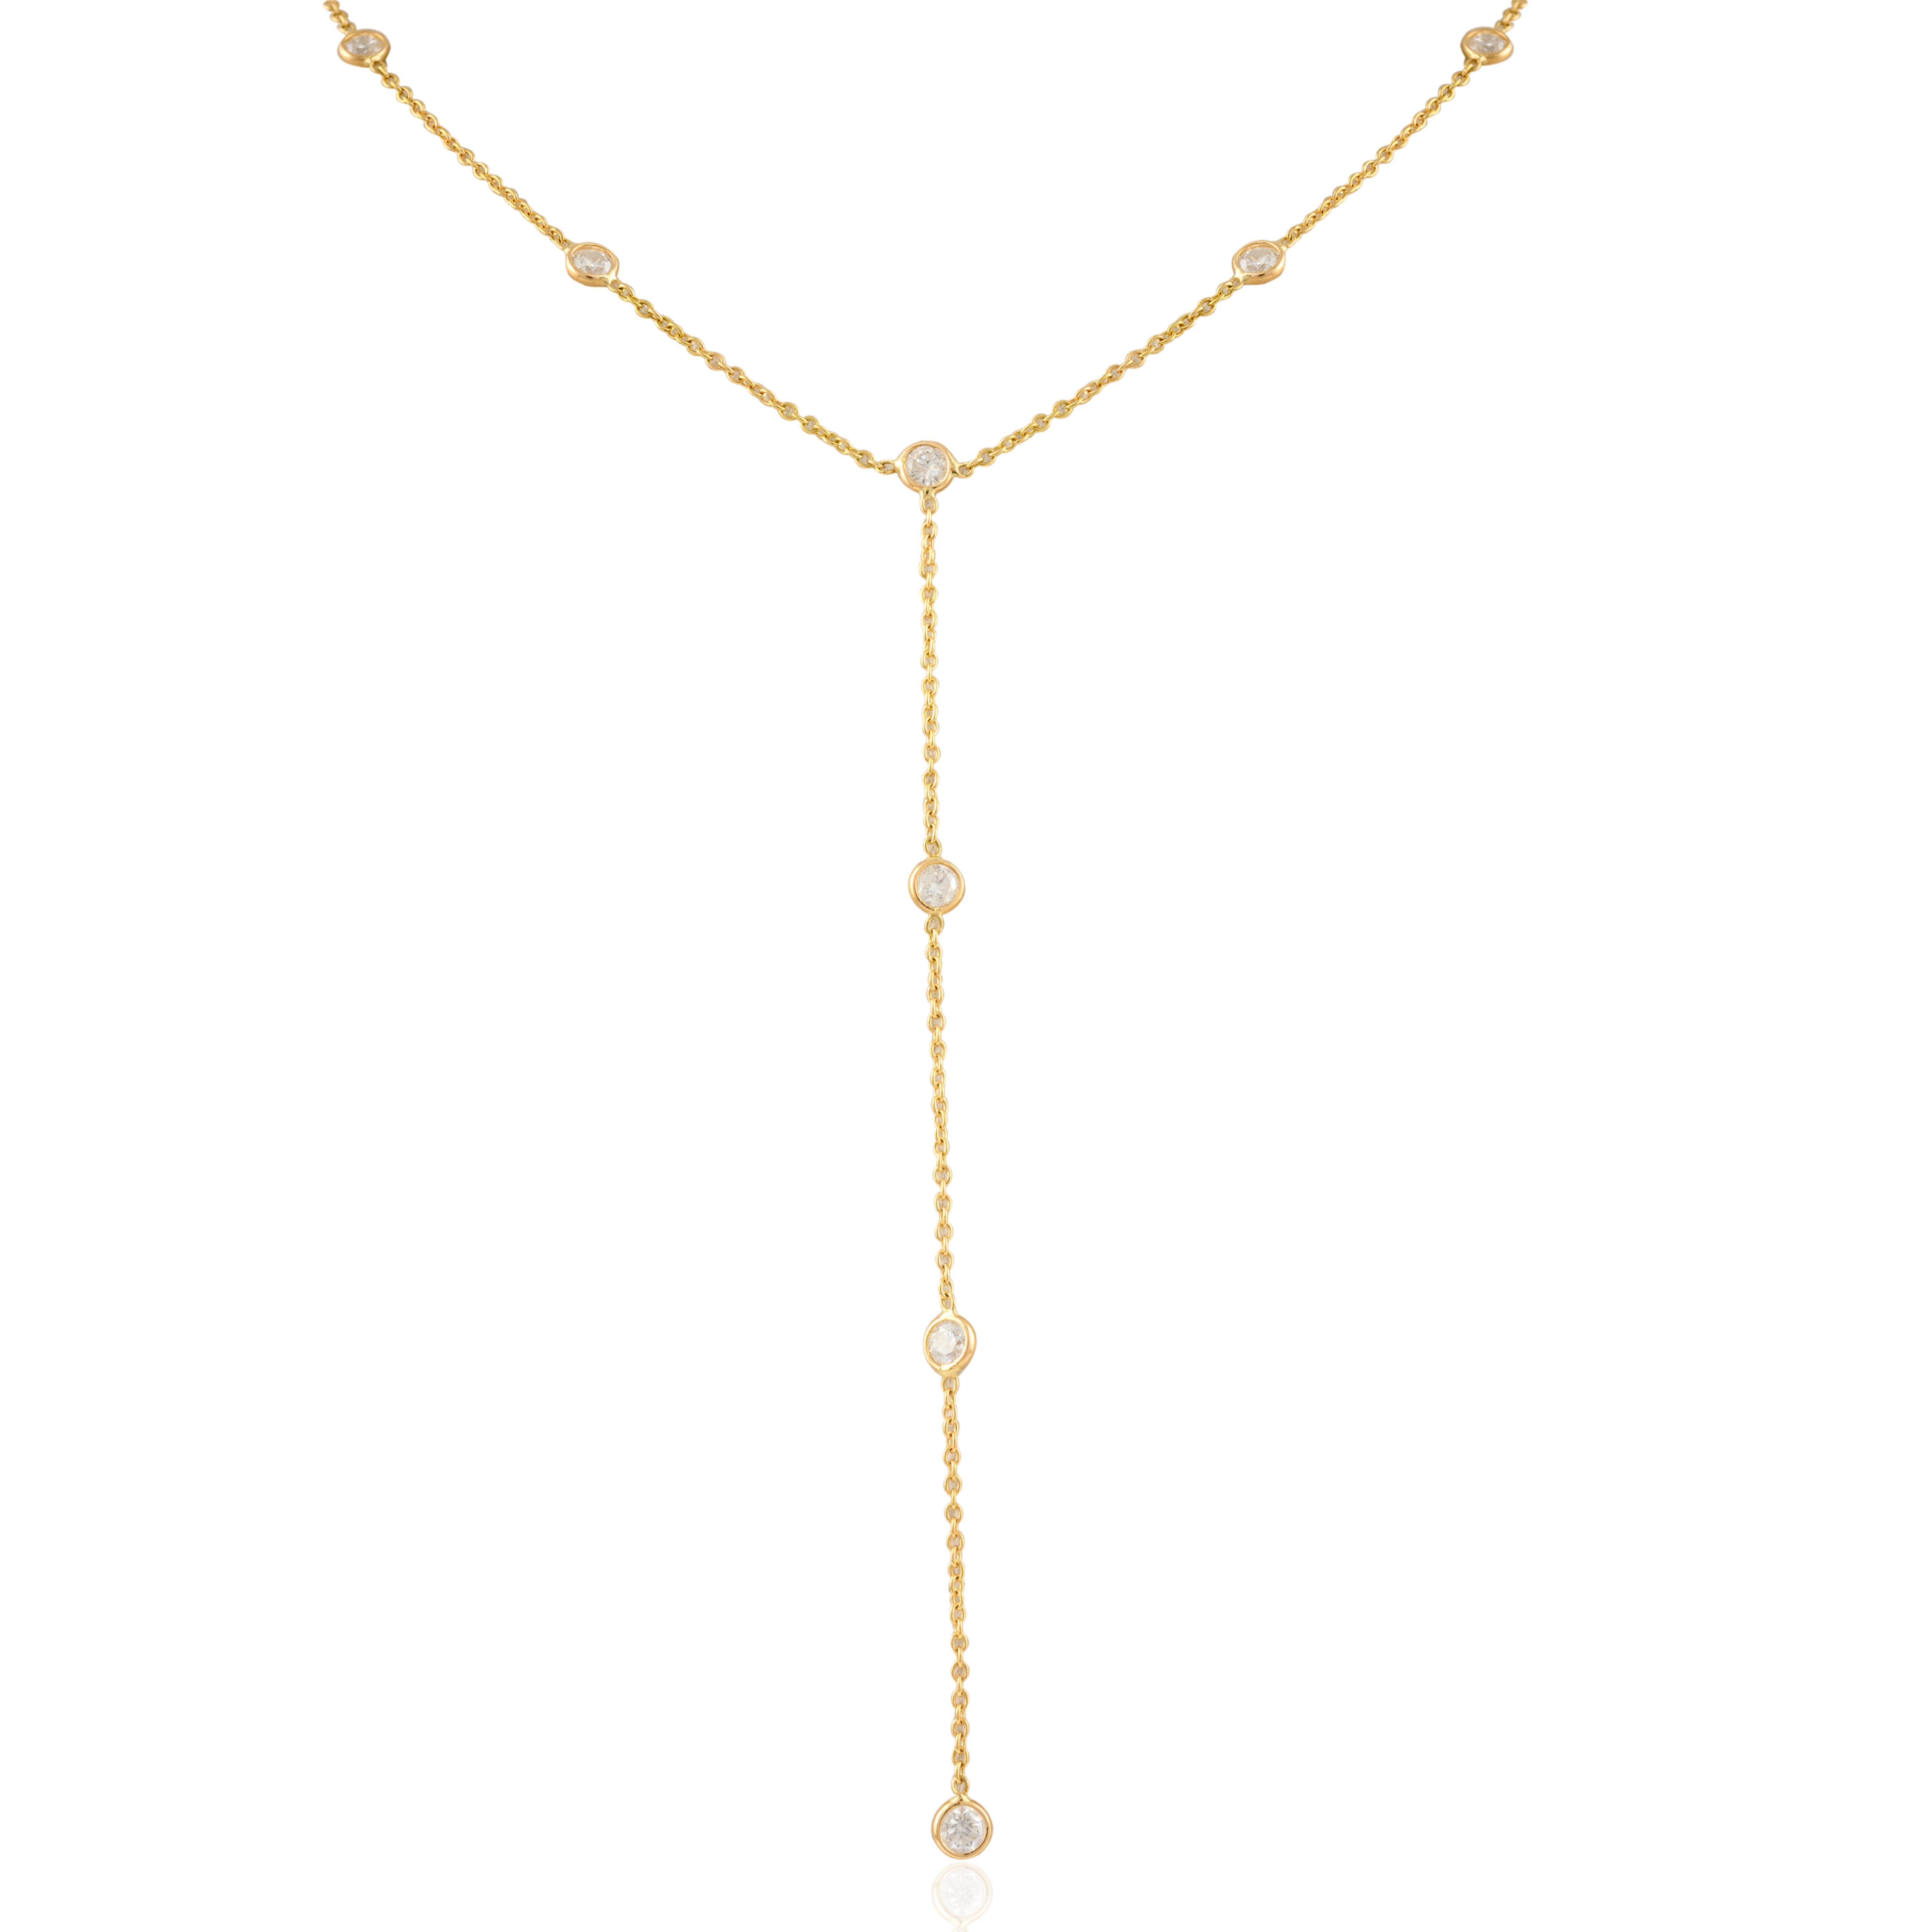 Women's 18kt Solid Yellow Gold 1 CTW Diamond Lariat Necklace, Gift For Her Christmas For Sale